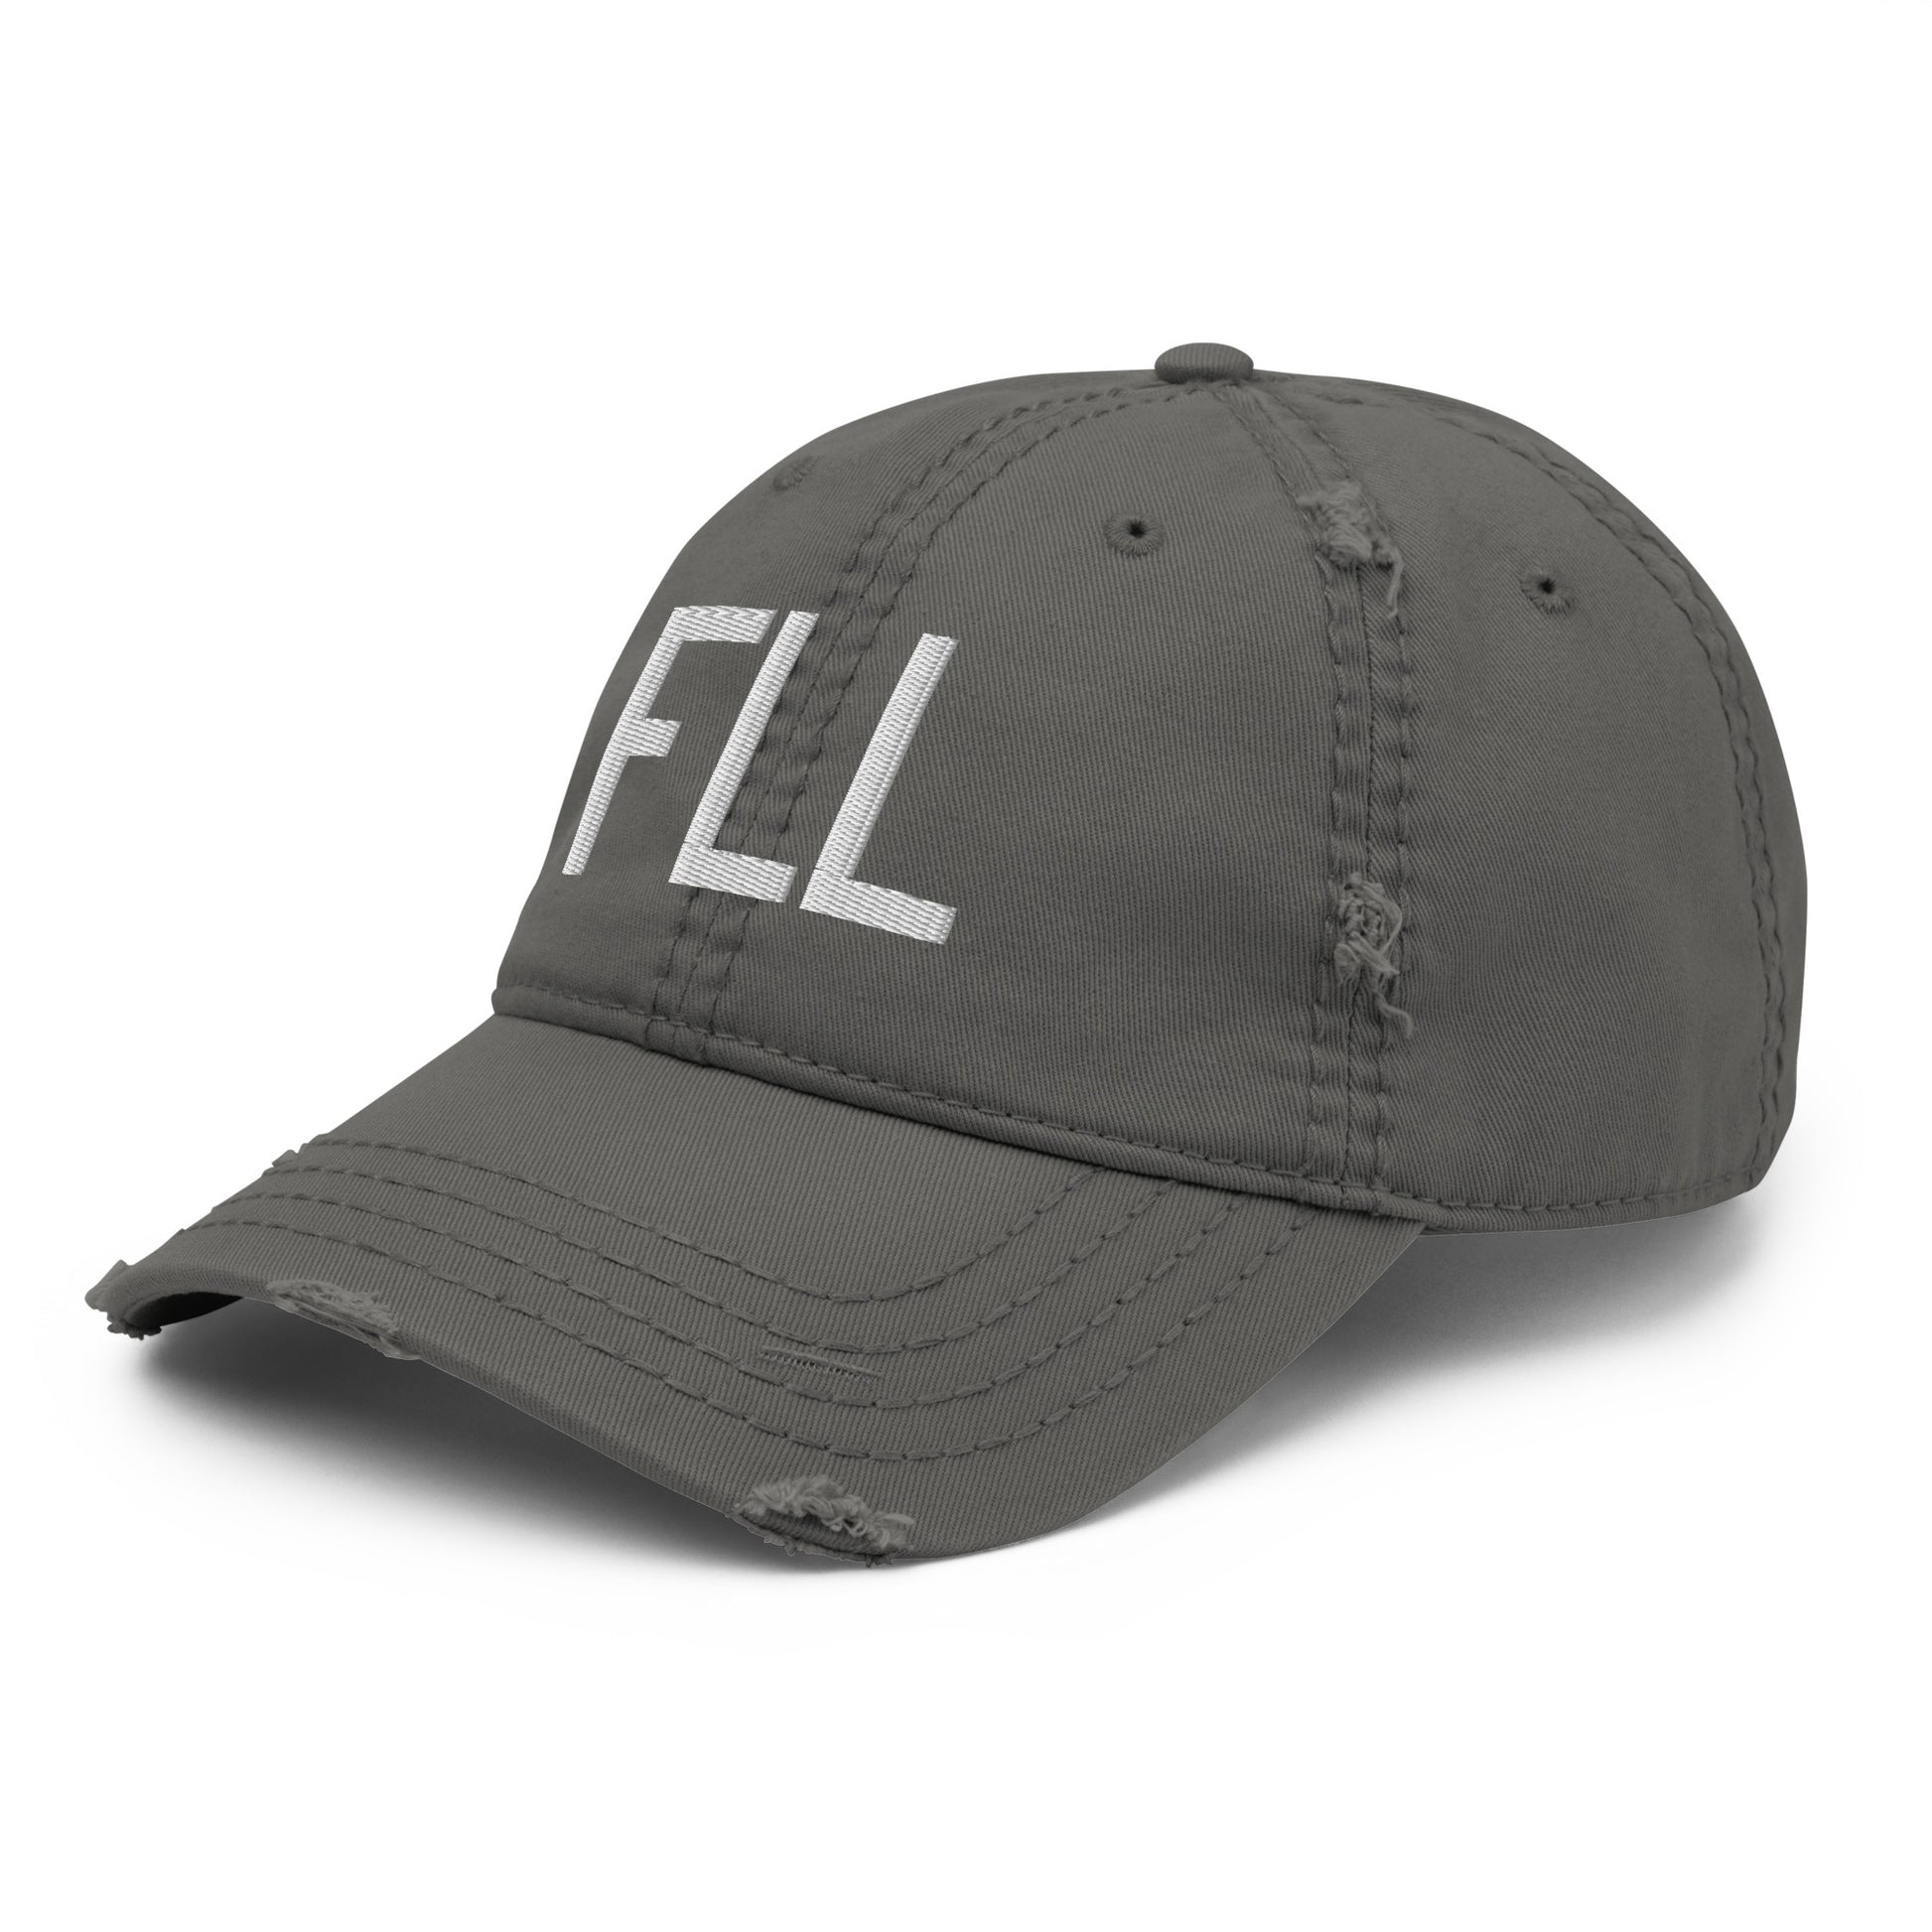 Airport Code Distressed Hat - White • FLL Fort Lauderdale • YHM Designs - Image 16